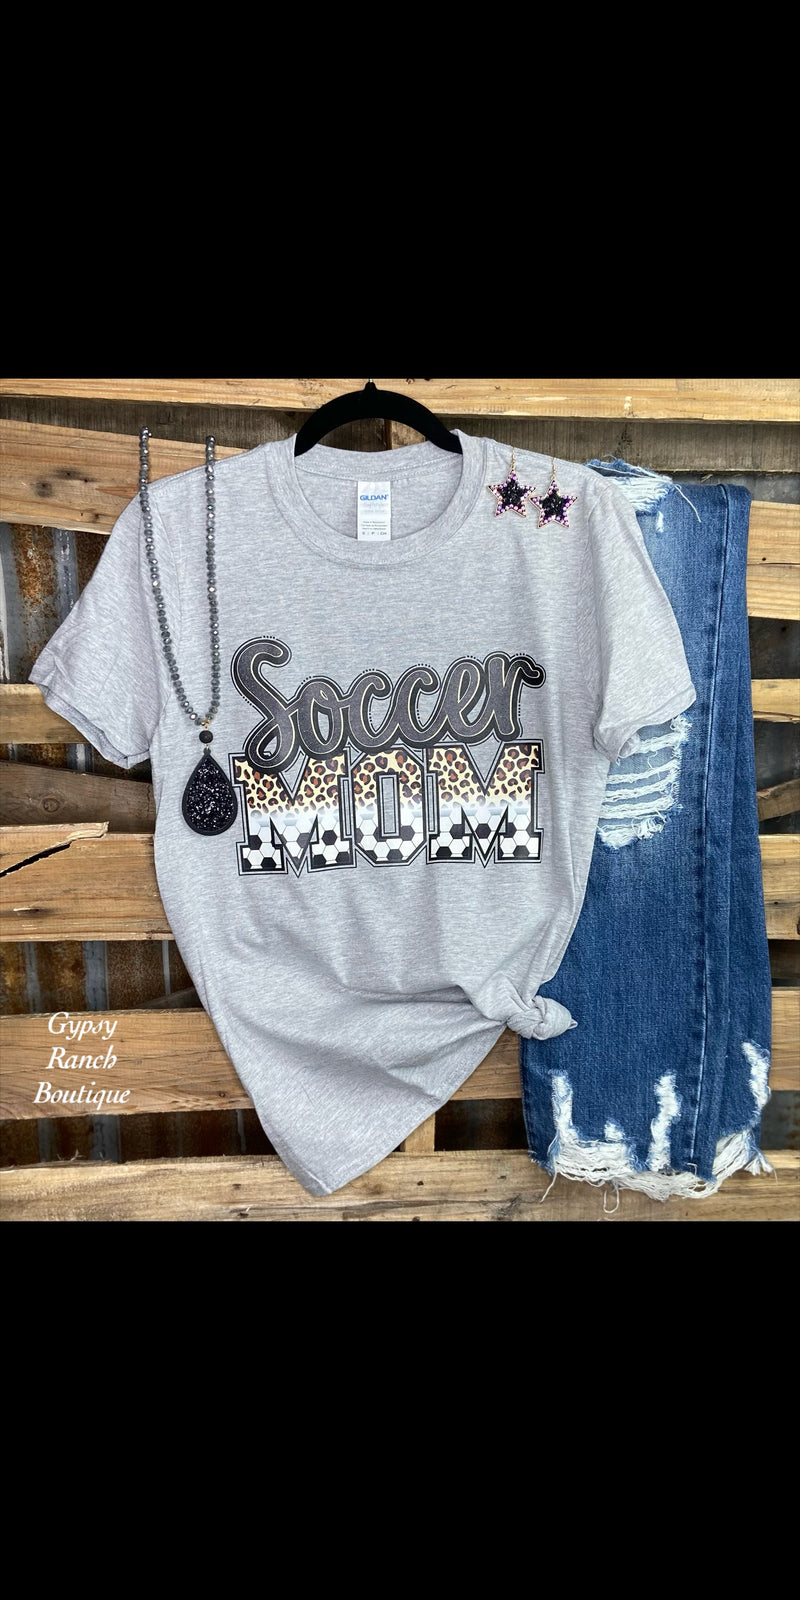 Soccer Mom Tee - Also in Plus Size